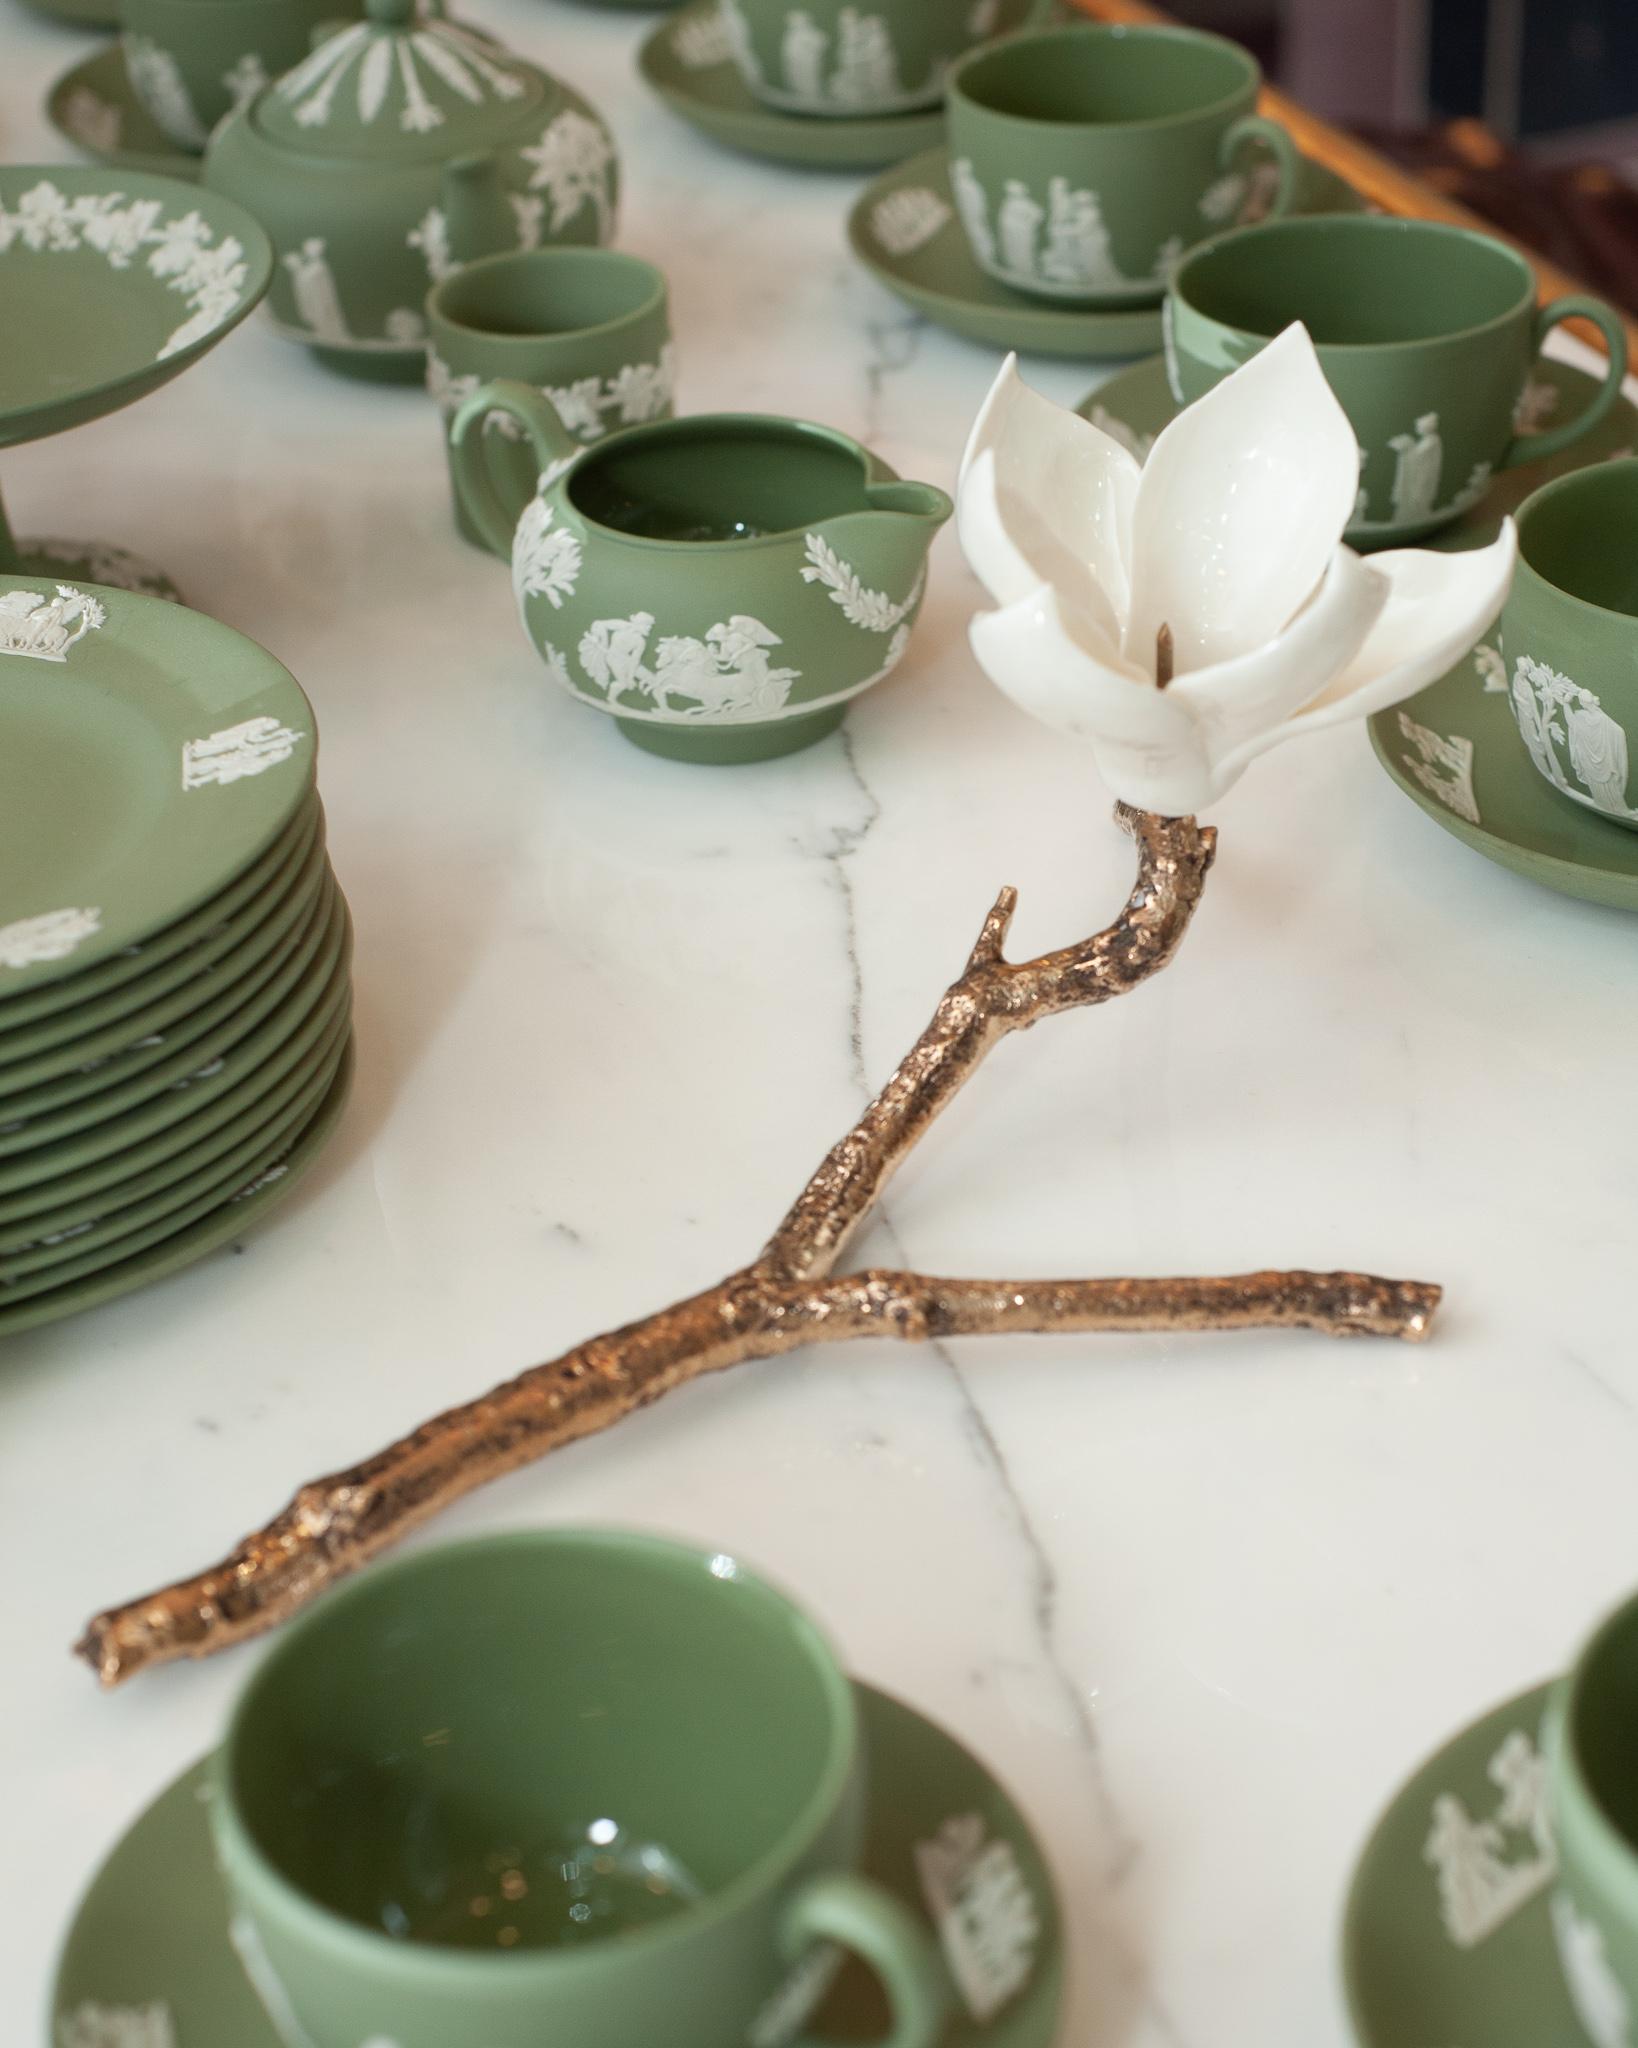 Enhance your table with this delicate porcelain magnolia flower candleholder by French artist Samuel Mazy, exclusive to Maison Nurita in Canada. Mazy has been working as a ceramist for nearly 20 years in Paris. He sculpts porcelain flowers to create